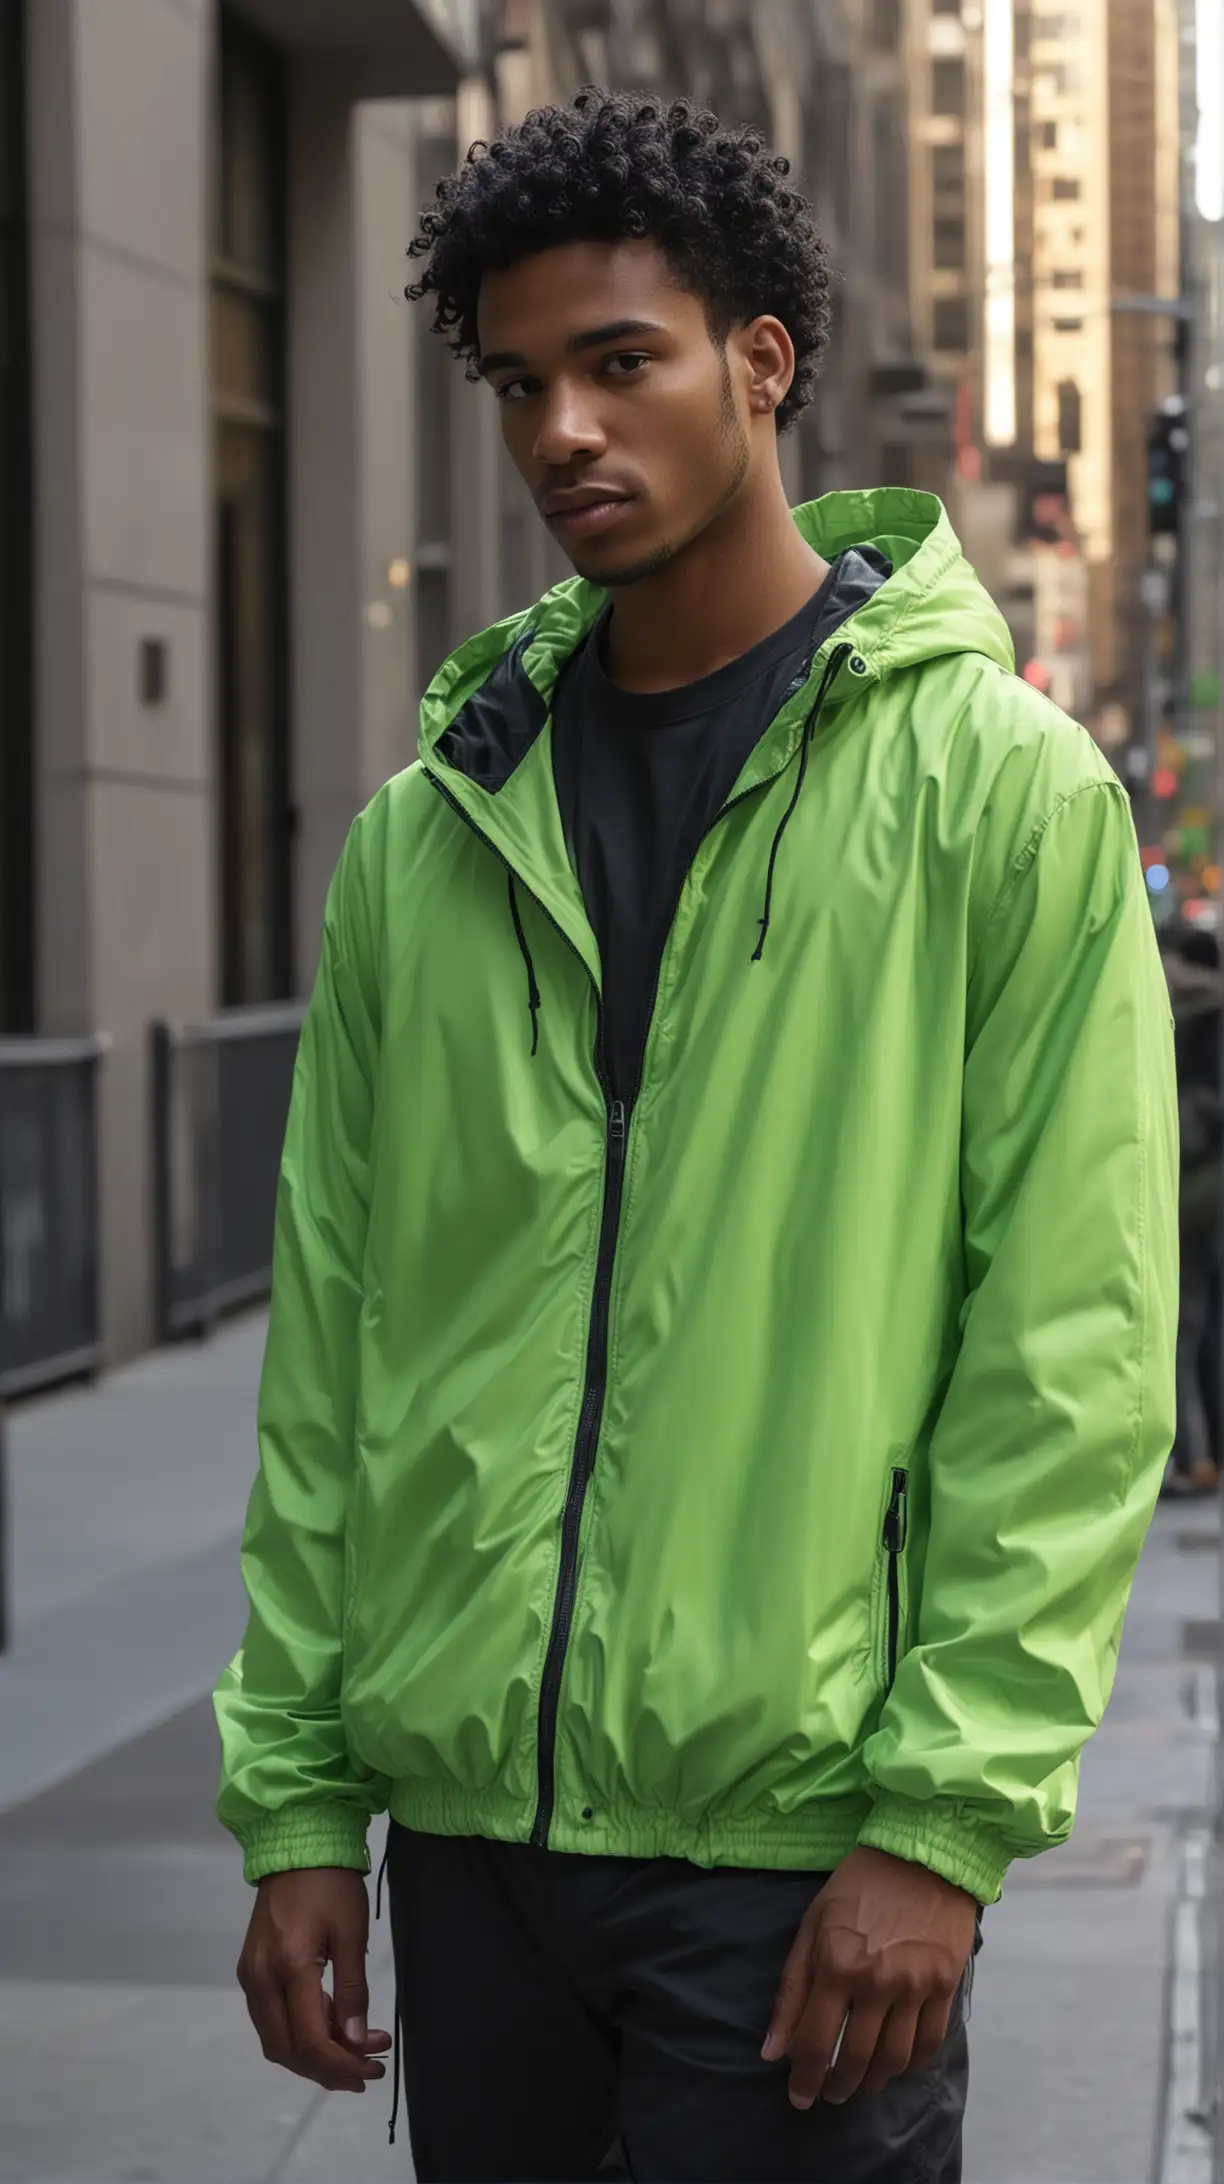 Attractive, black, young man wearing a curly black hairstyle, wearing a neon green, zip front, hooded, nylon windbreaker, standing on sidewalk, in the financial district in New York, in the morning, light is bright and volumetric, 4k resolution hyper realistic